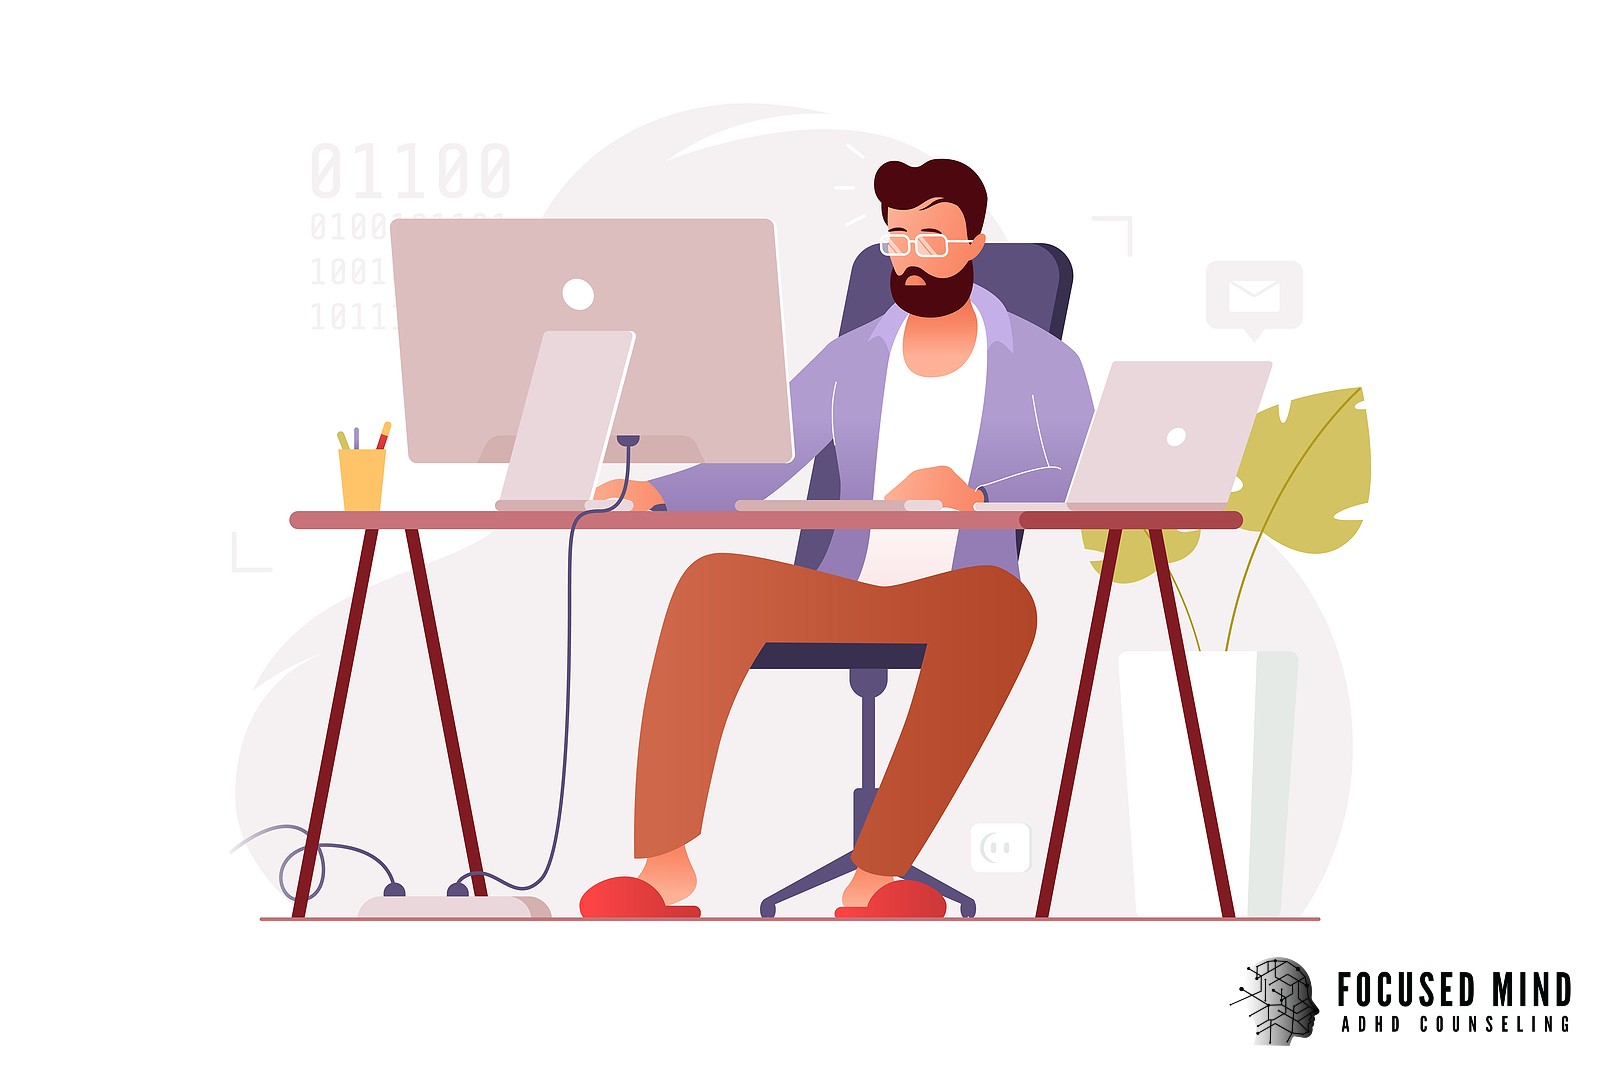 A graphic of a man sitting at his computer desk with a laptop nearby. This could symbolize what online ADHD treatment in Columbus, OH might look like. Contact Focused Mind ADHD Counseling to get in touch with an adult ADHD specialist. An ADHD specialist can offer the support you deserve.